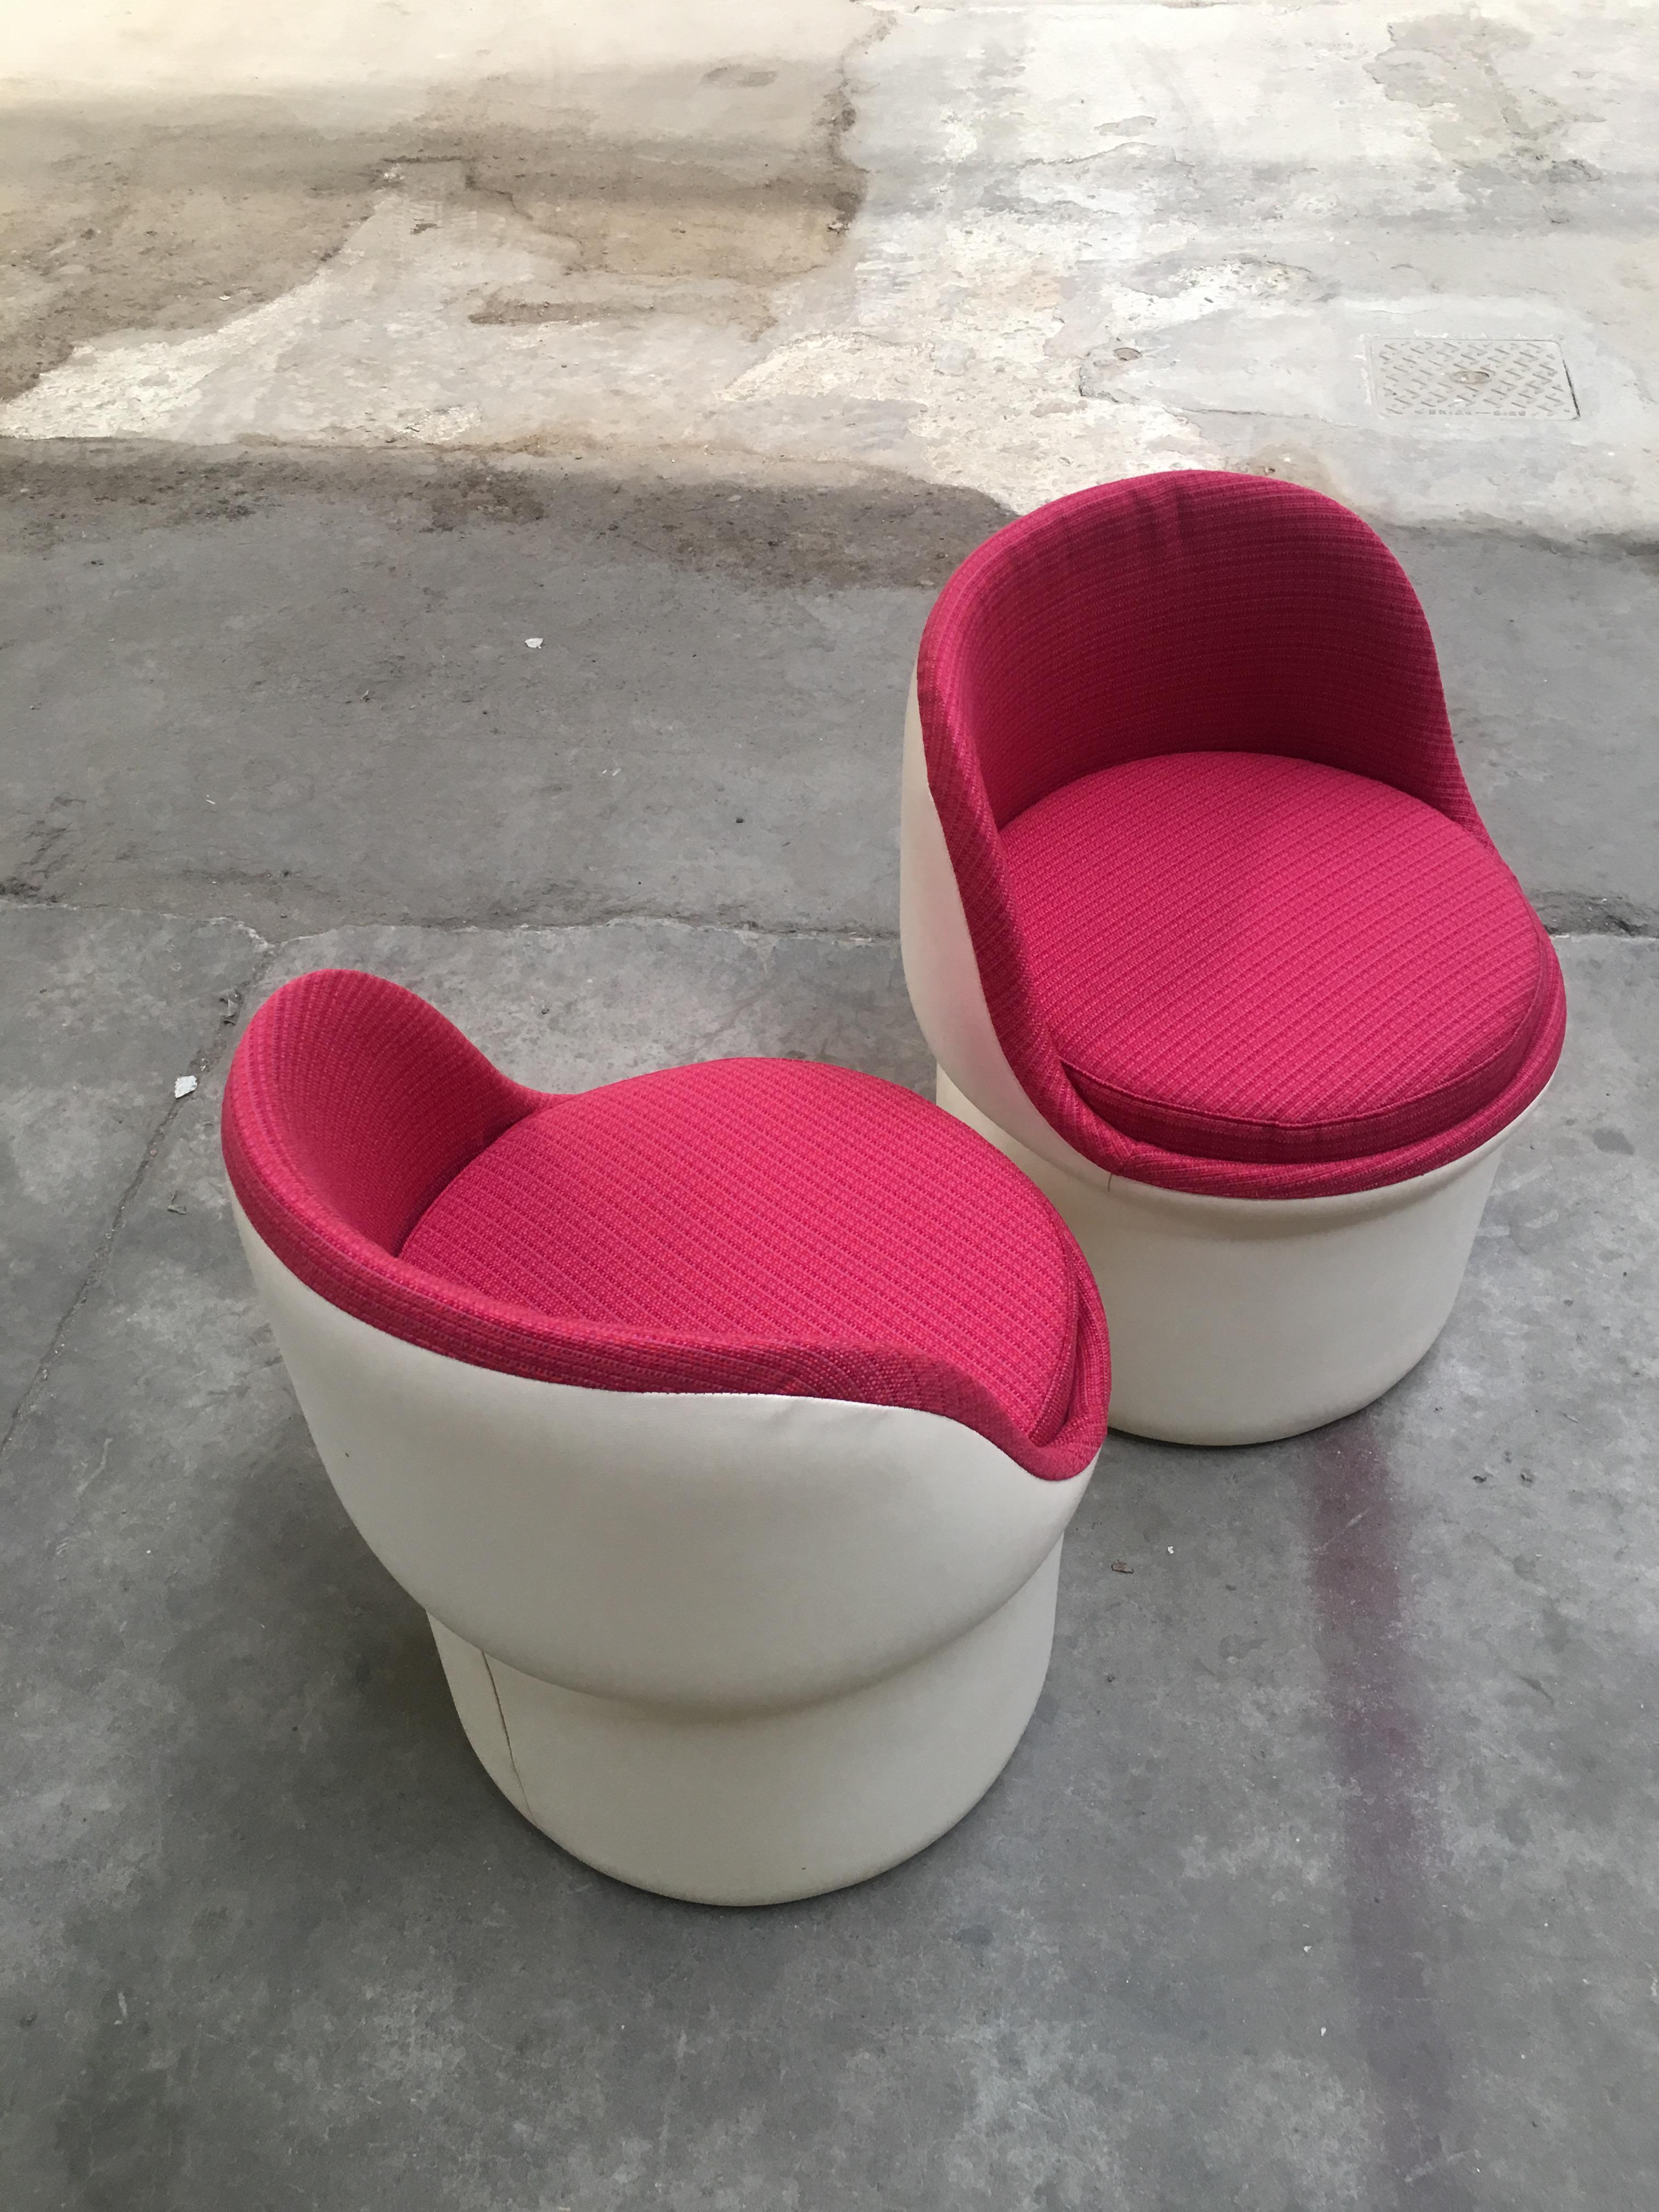 Mid-Century Modern Italian Pair of Faux Leather and Fabric Armchairs, 1970s For Sale 3